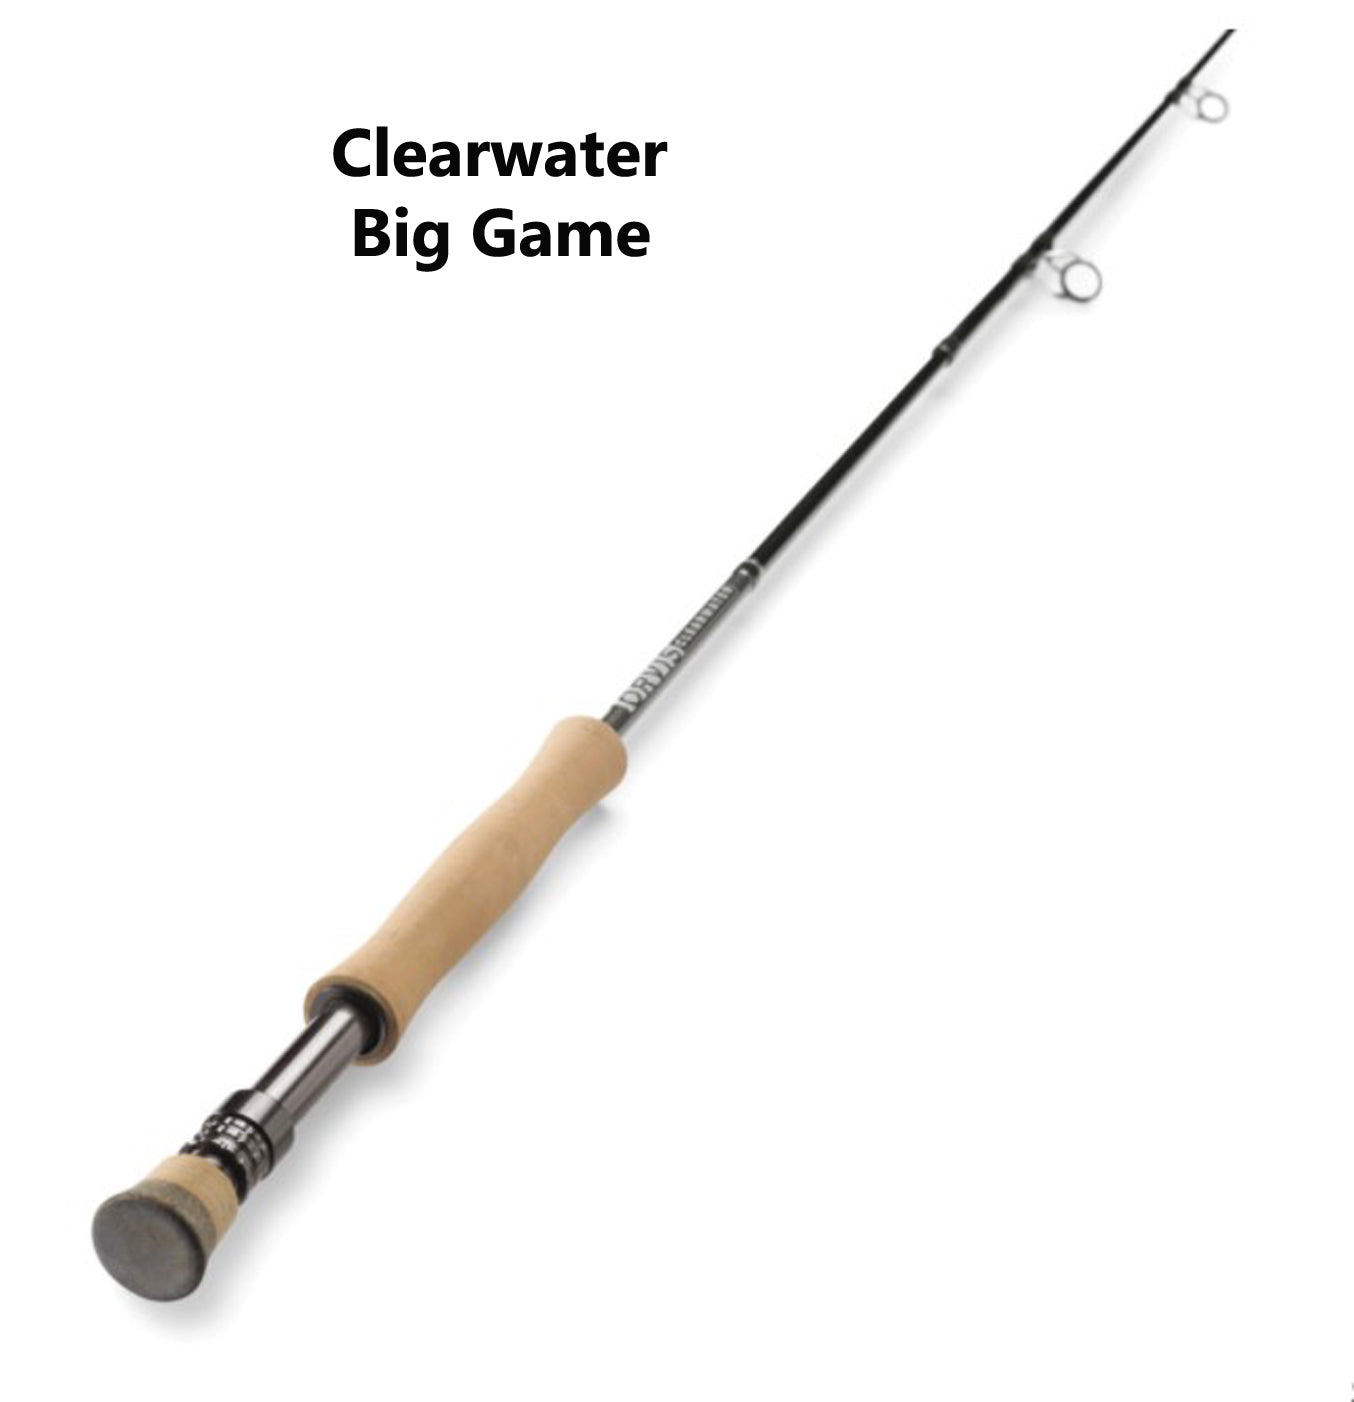 Orvis Clearwater Rod and Reel Boxed Outfit - Breton's Bike & Fly Shop